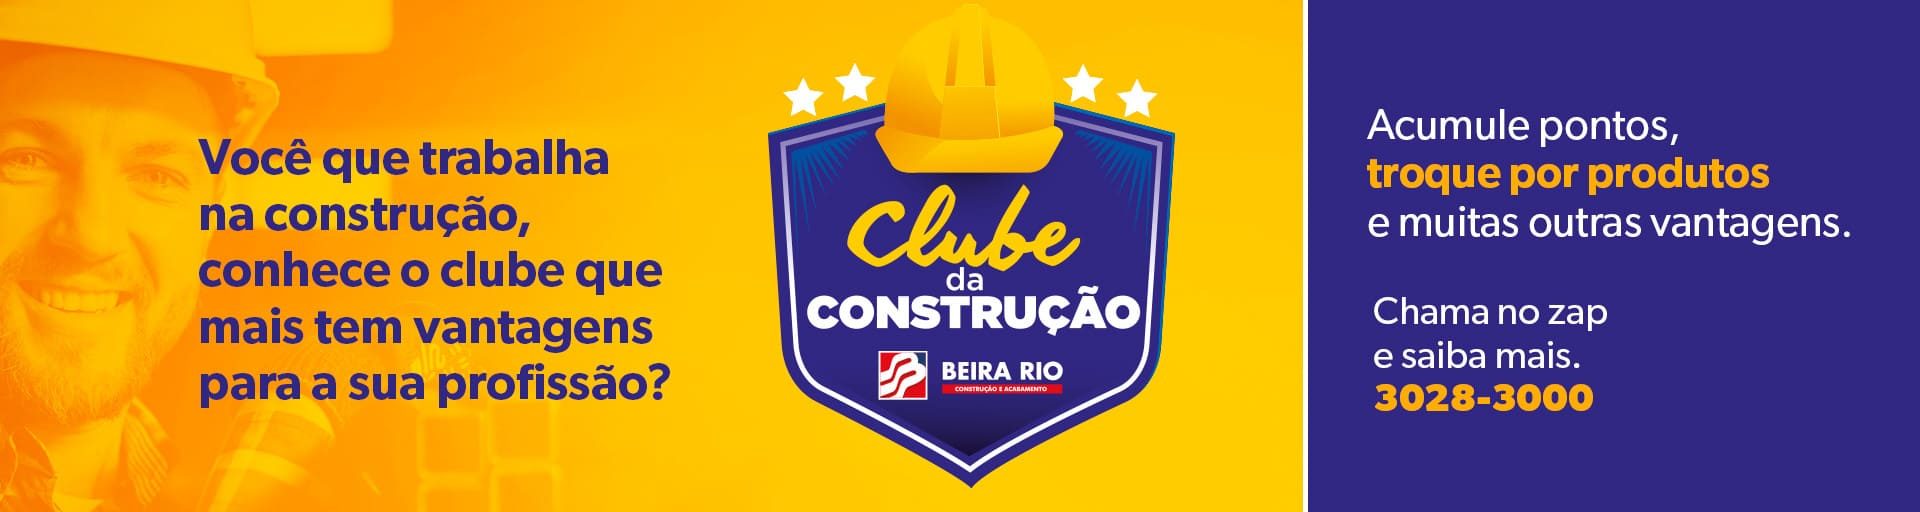 Banner site BR clube 1920 x 512px (1)